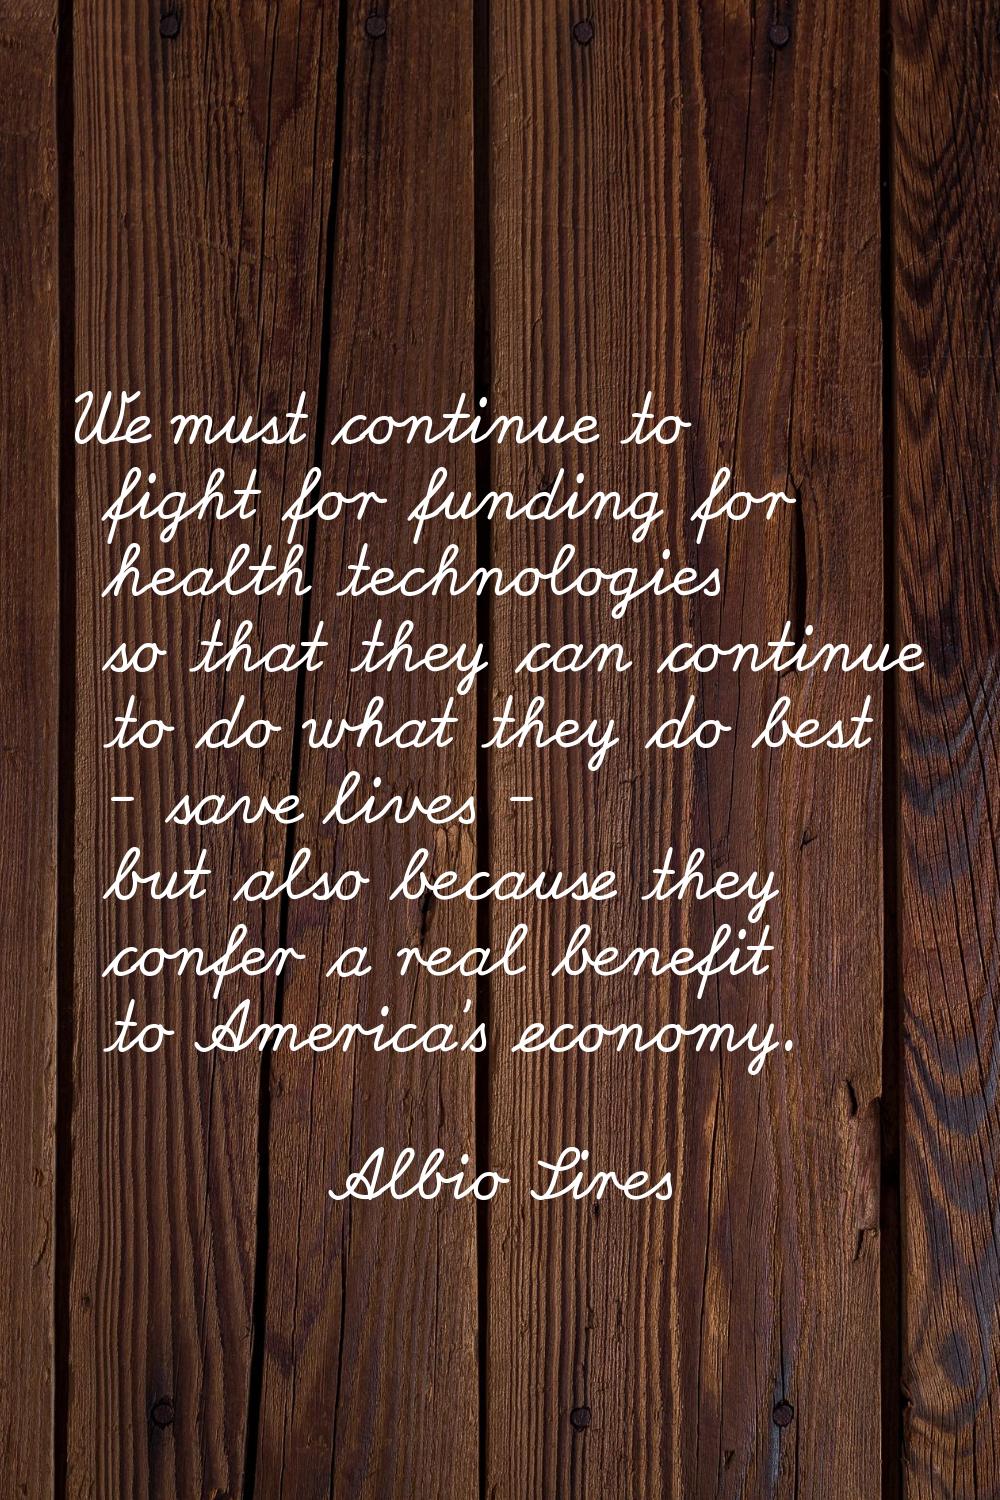 We must continue to fight for funding for health technologies so that they can continue to do what 